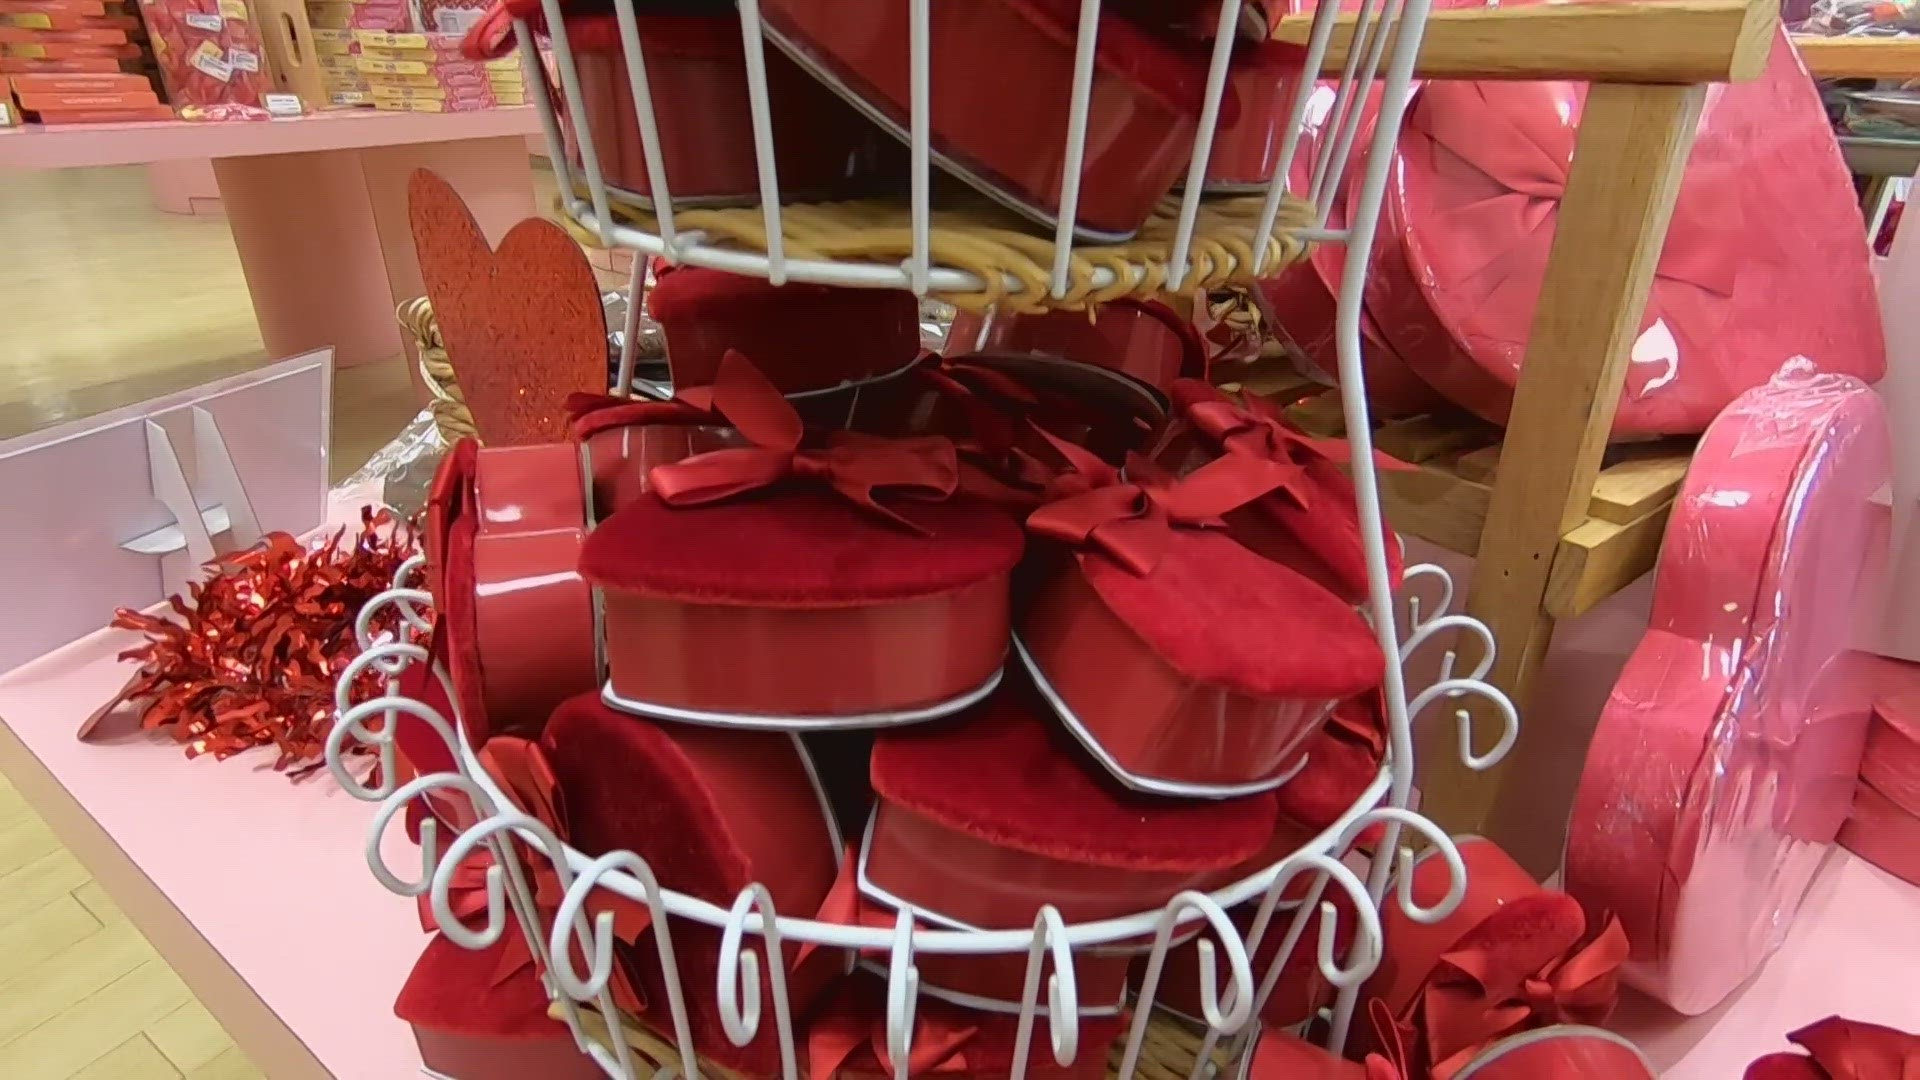 Malley's Chocolates offers a variety of different gift ideas for Valentine's Day.